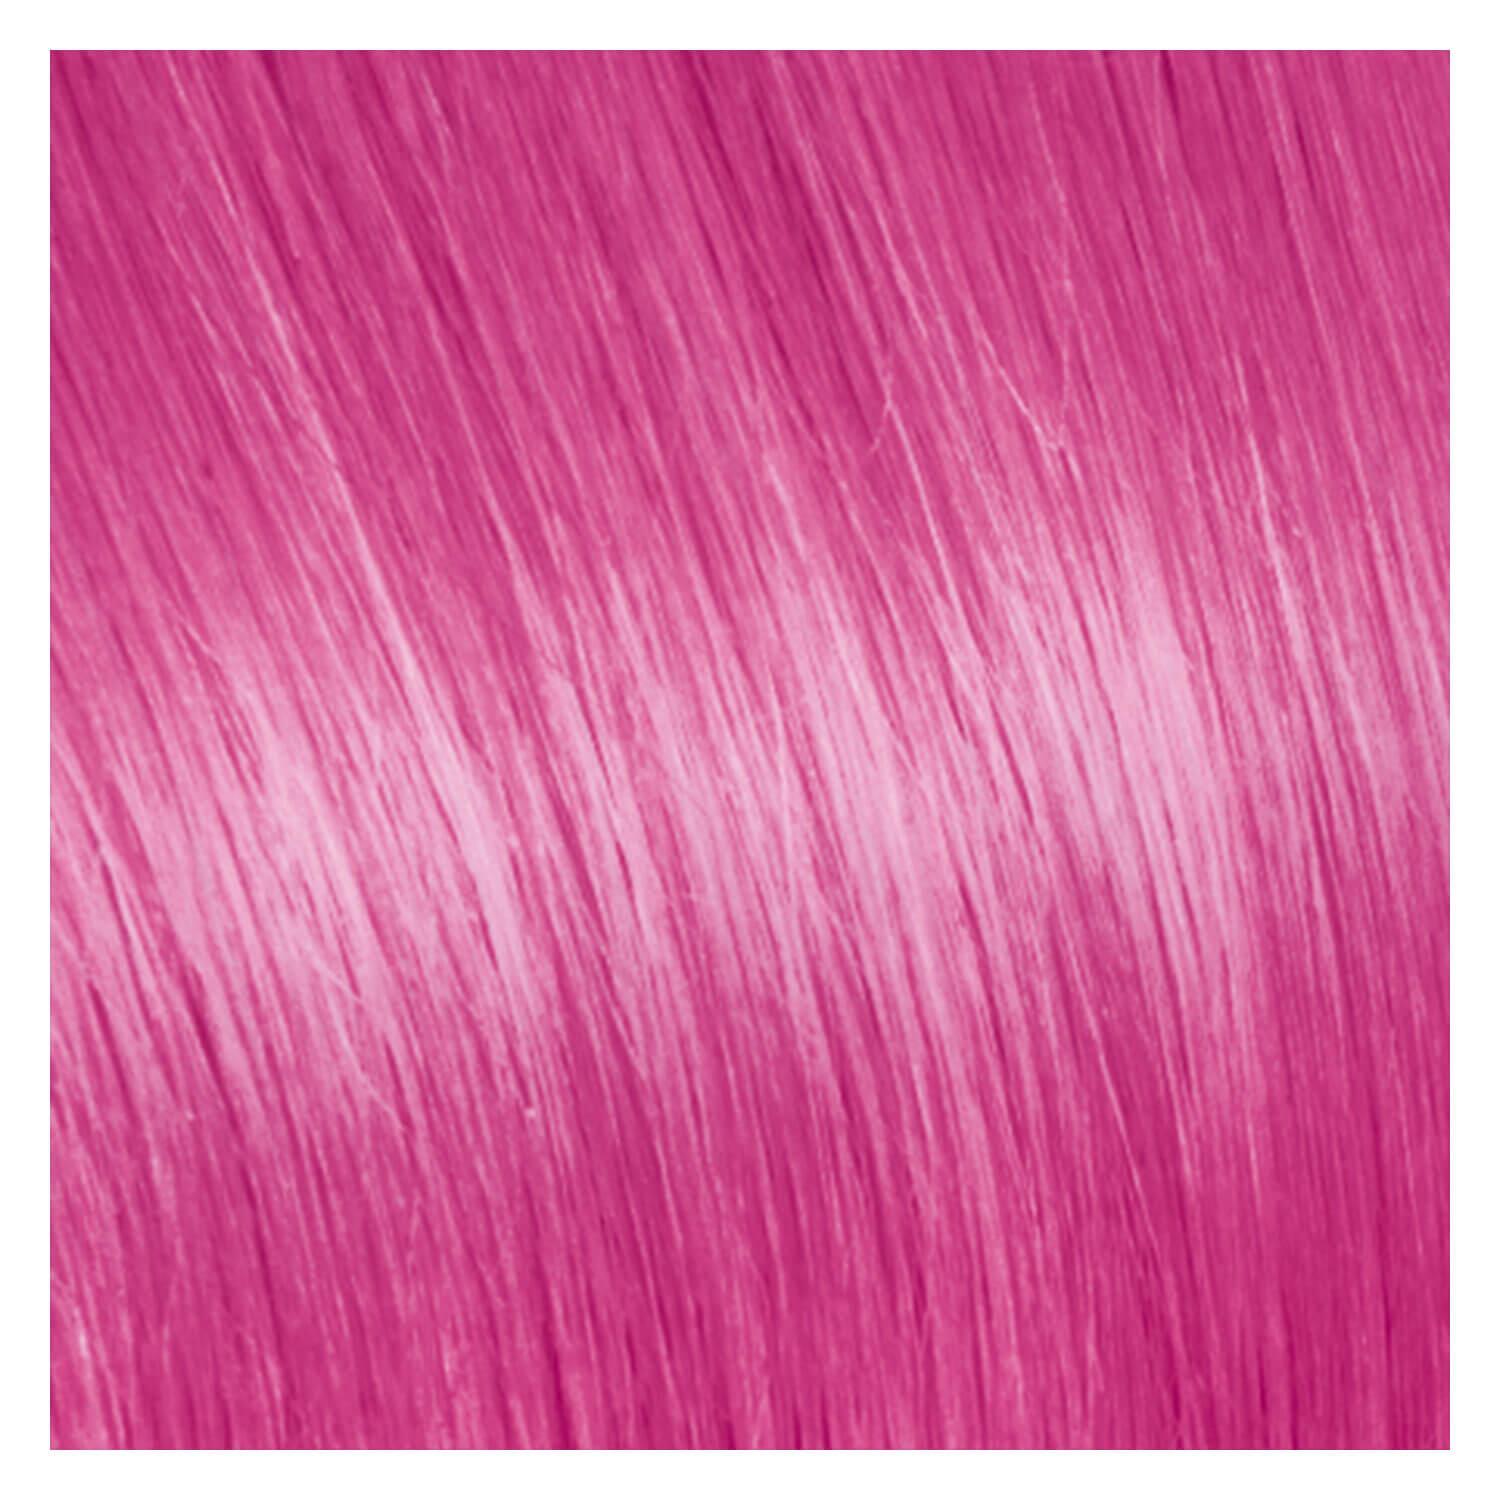 SHE Clip In-System Hair Extensions - Fuchsia 40cm